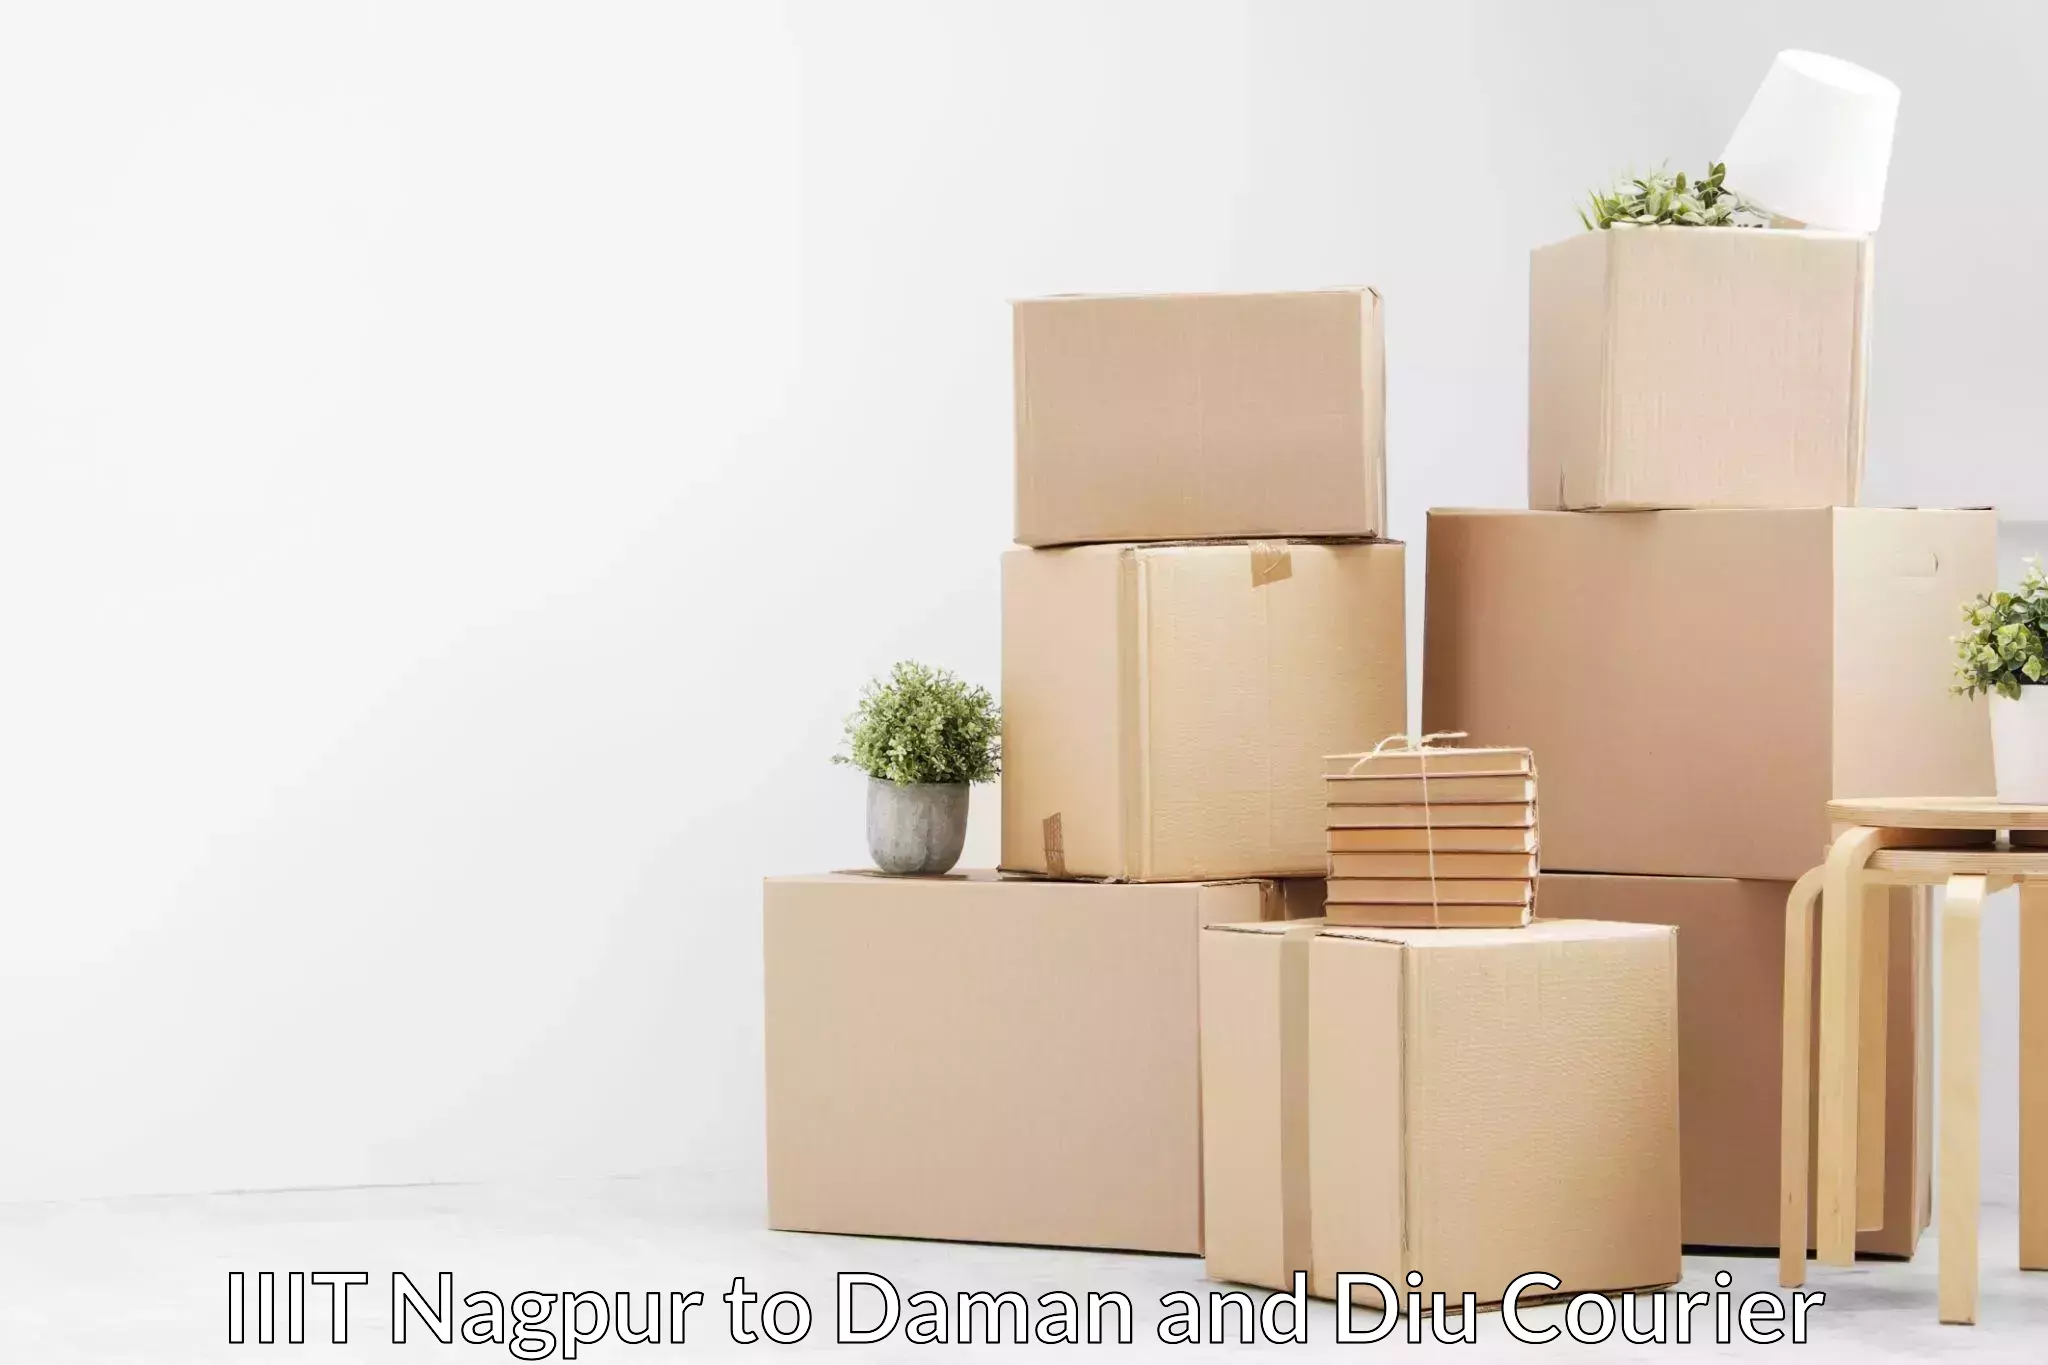 Trusted moving company IIIT Nagpur to Daman